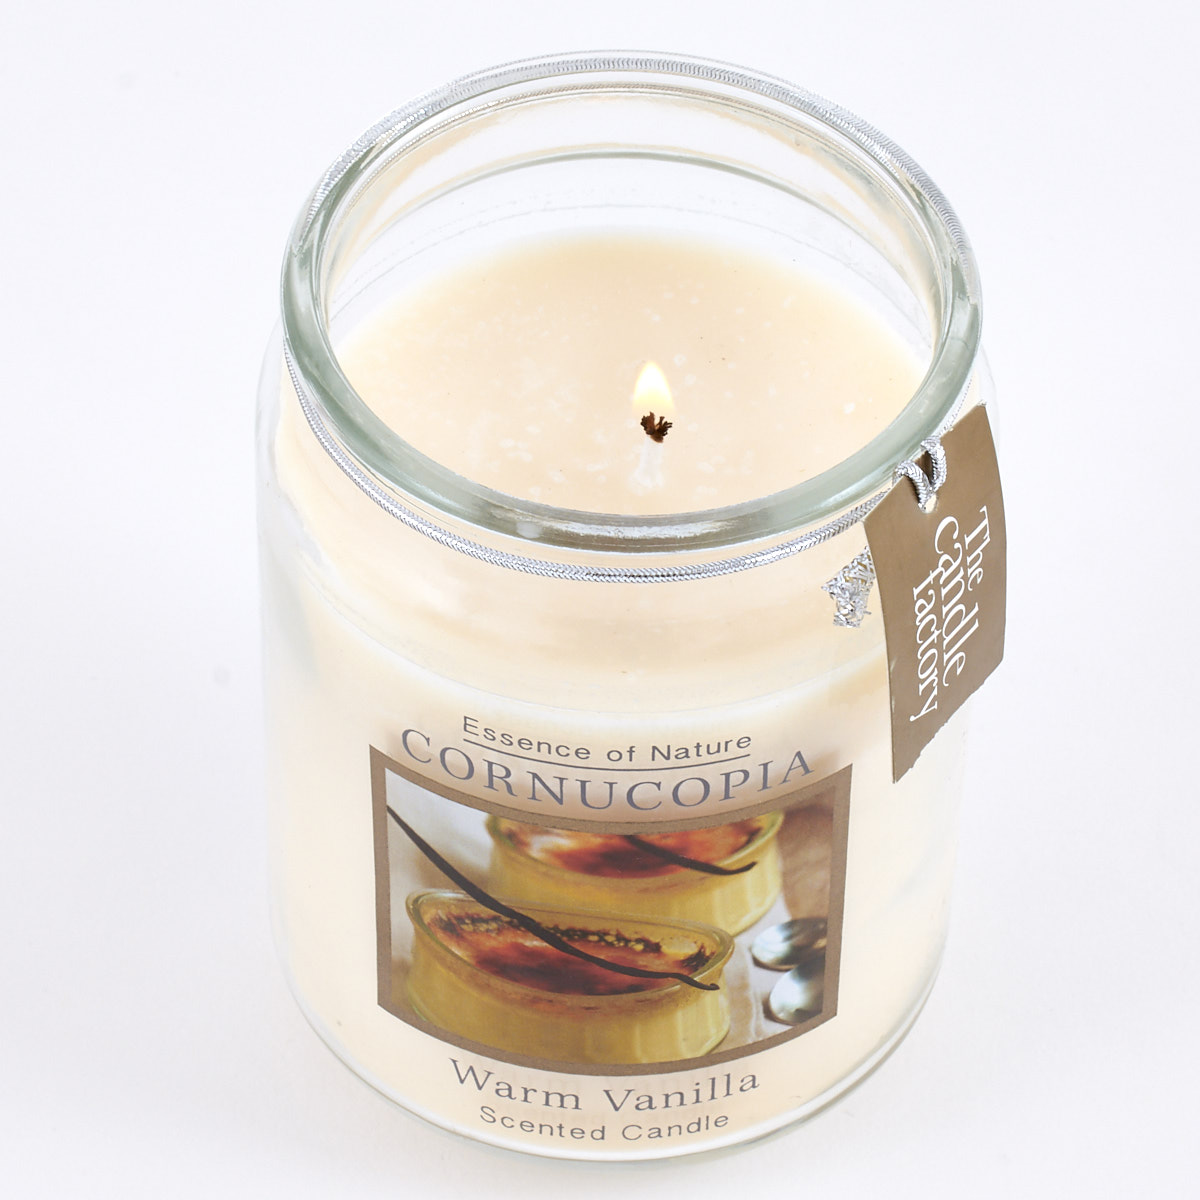 Buy Cornucopia Warm Vanilla Scented Candle For Gbp 499 Card Factory Uk 